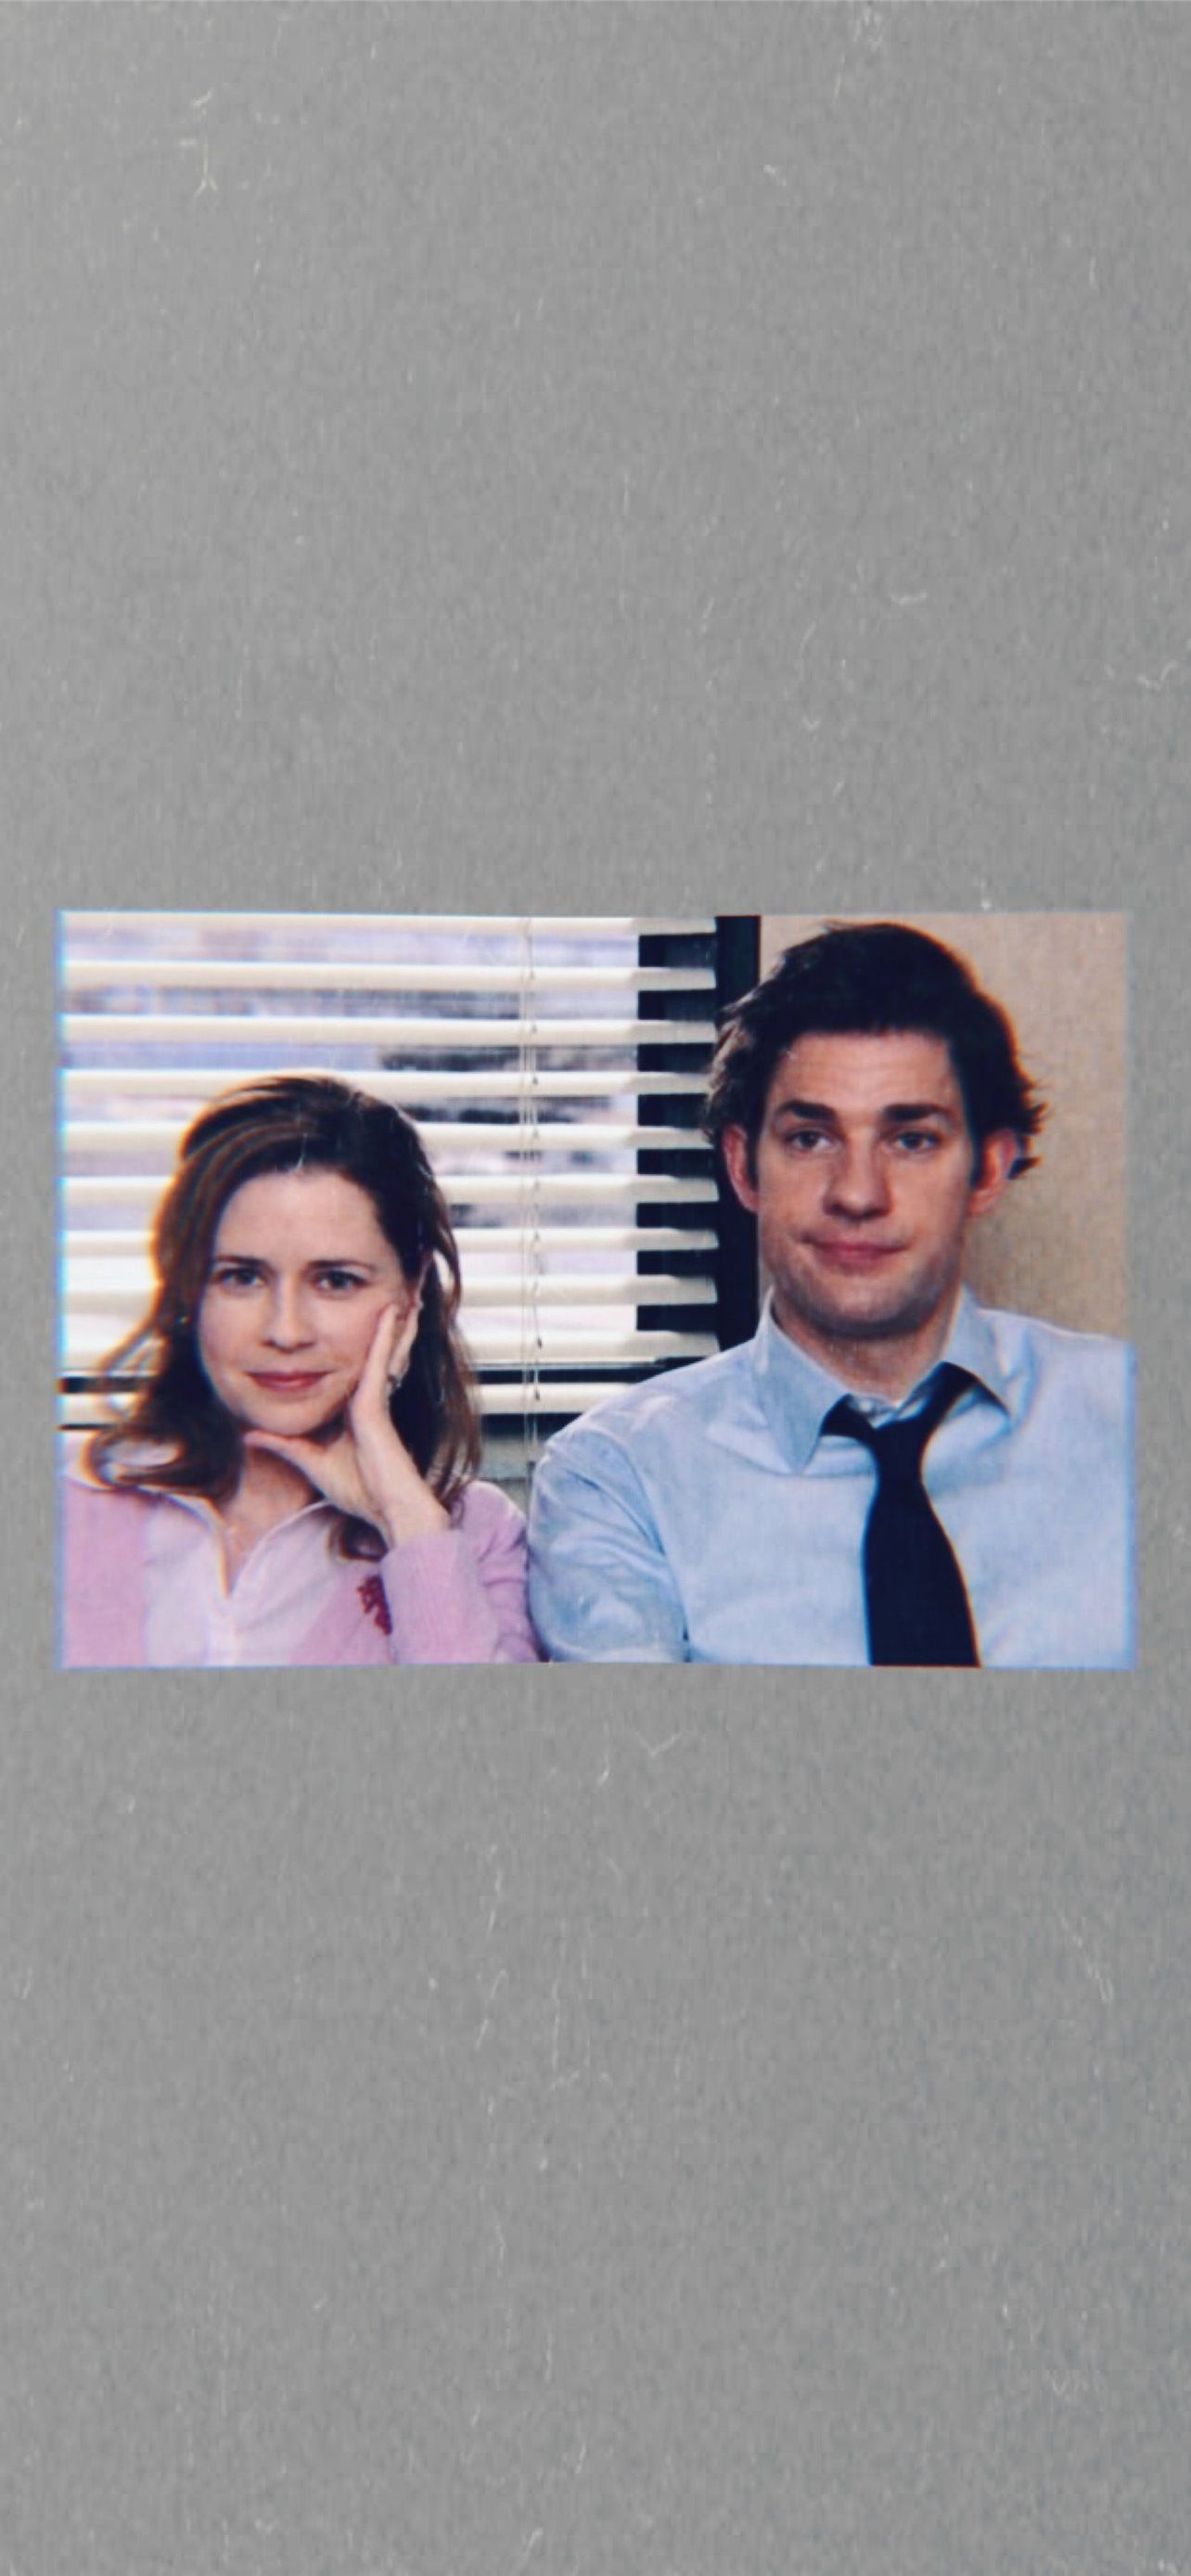 The Office Aesthetic Top Free The Office Aesthetic. iPhone Wallpaper Free Download